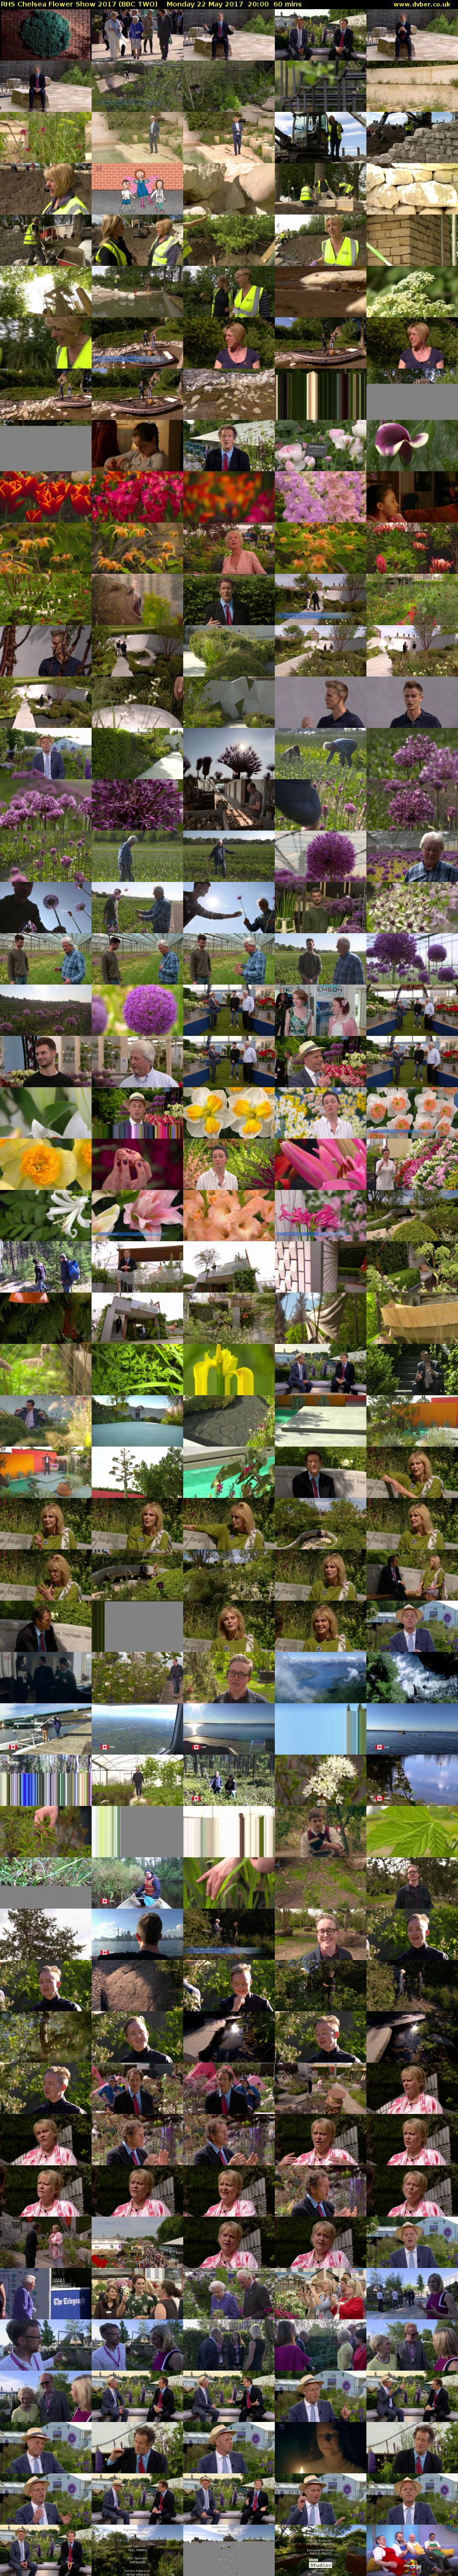 RHS Chelsea Flower Show 2017 (BBC TWO) Monday 22 May 2017 20:00 - 21:00